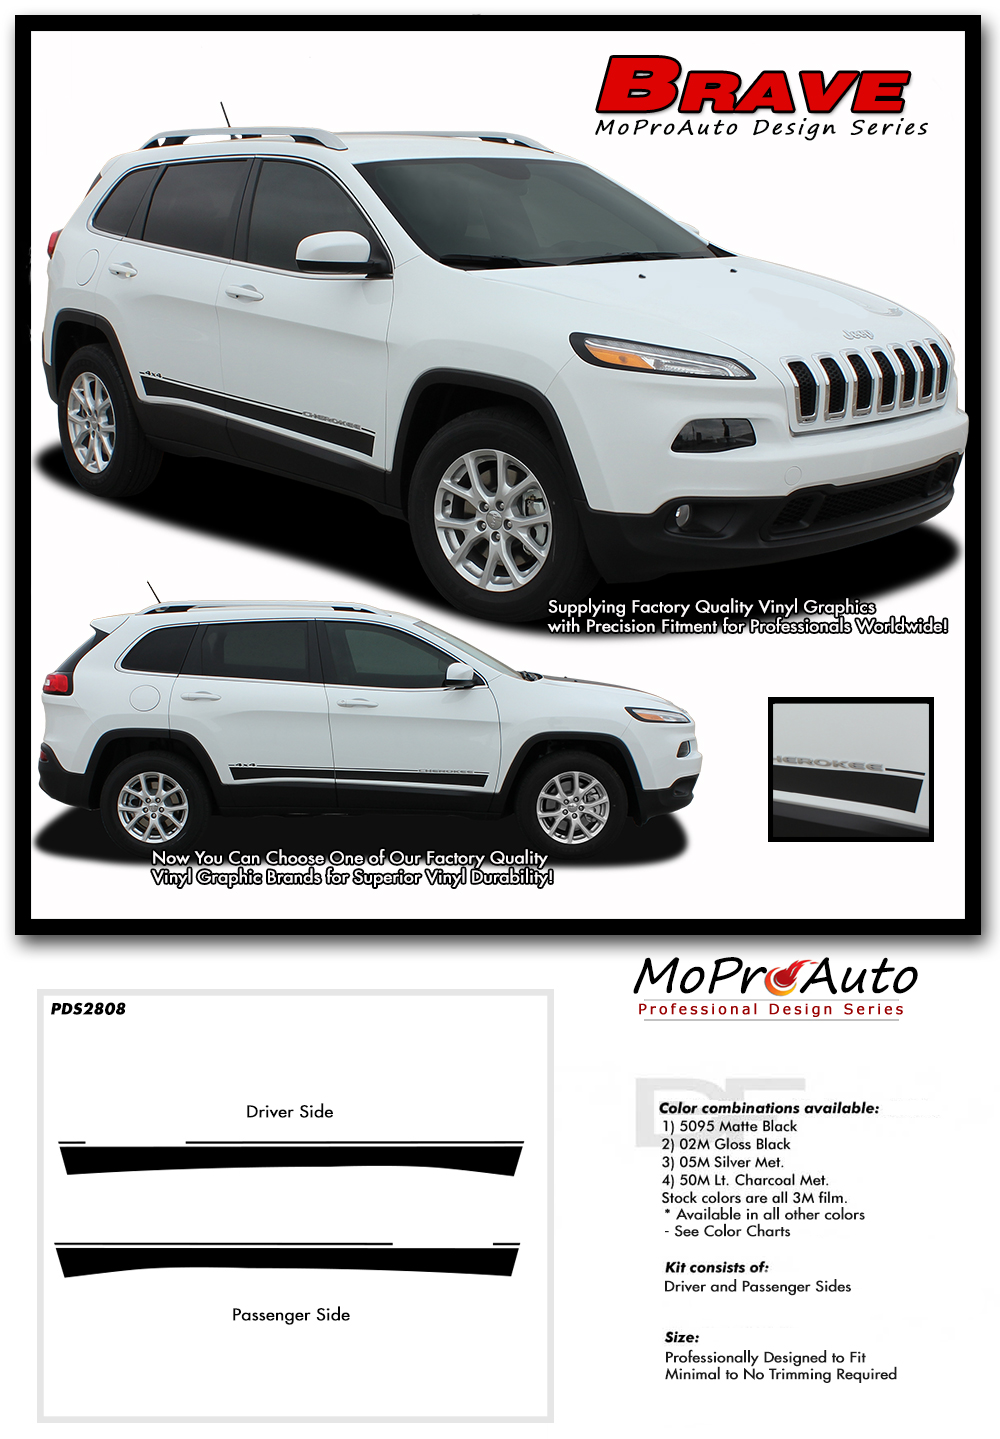 2013, 2014, 2015, 2016, 2017, 2018, 2019, 2020, 2021 Jeep Cherokee - MoProAuto Pro Design Series Vinyl Graphics, Stripes and Decals Kit